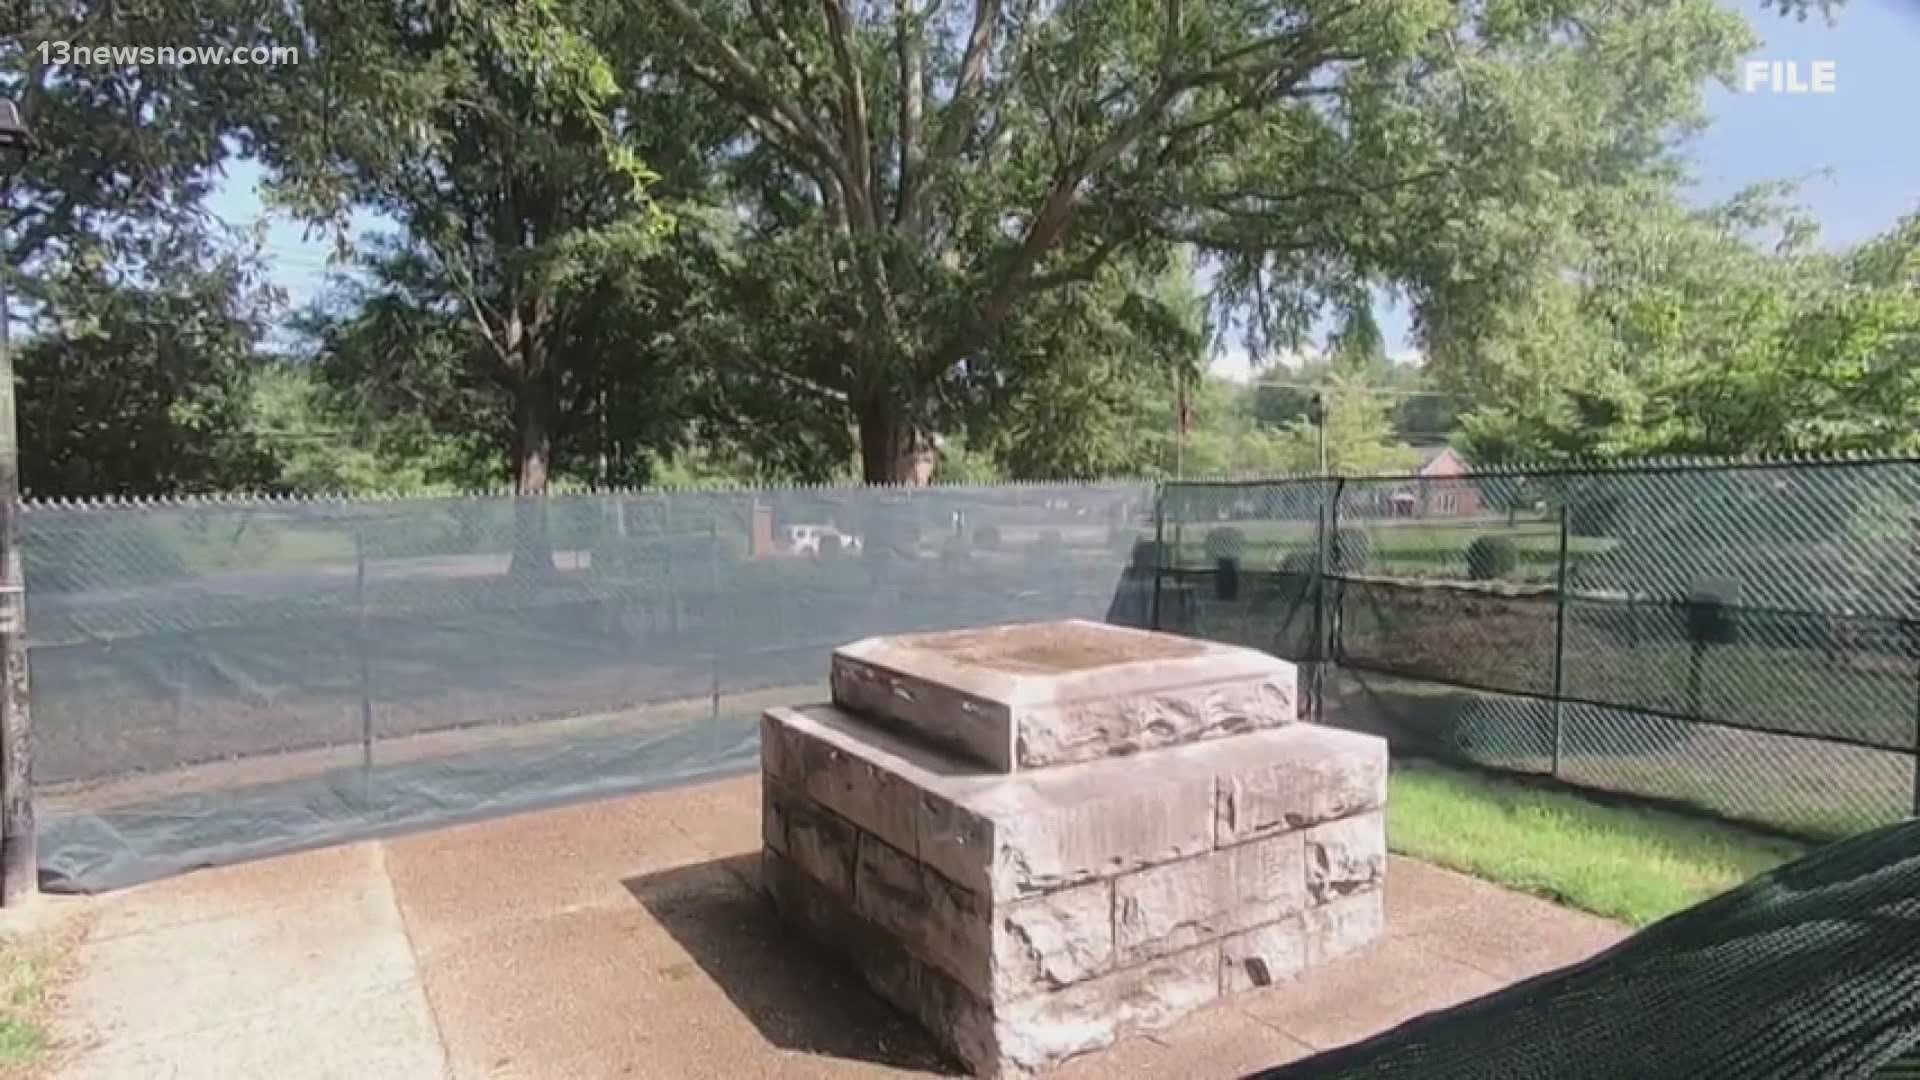 The Princess Anne County Confederate monument still sits in storage, but city leaders are trying to decide where to relocate it. 13News Now Evan Watson has more.